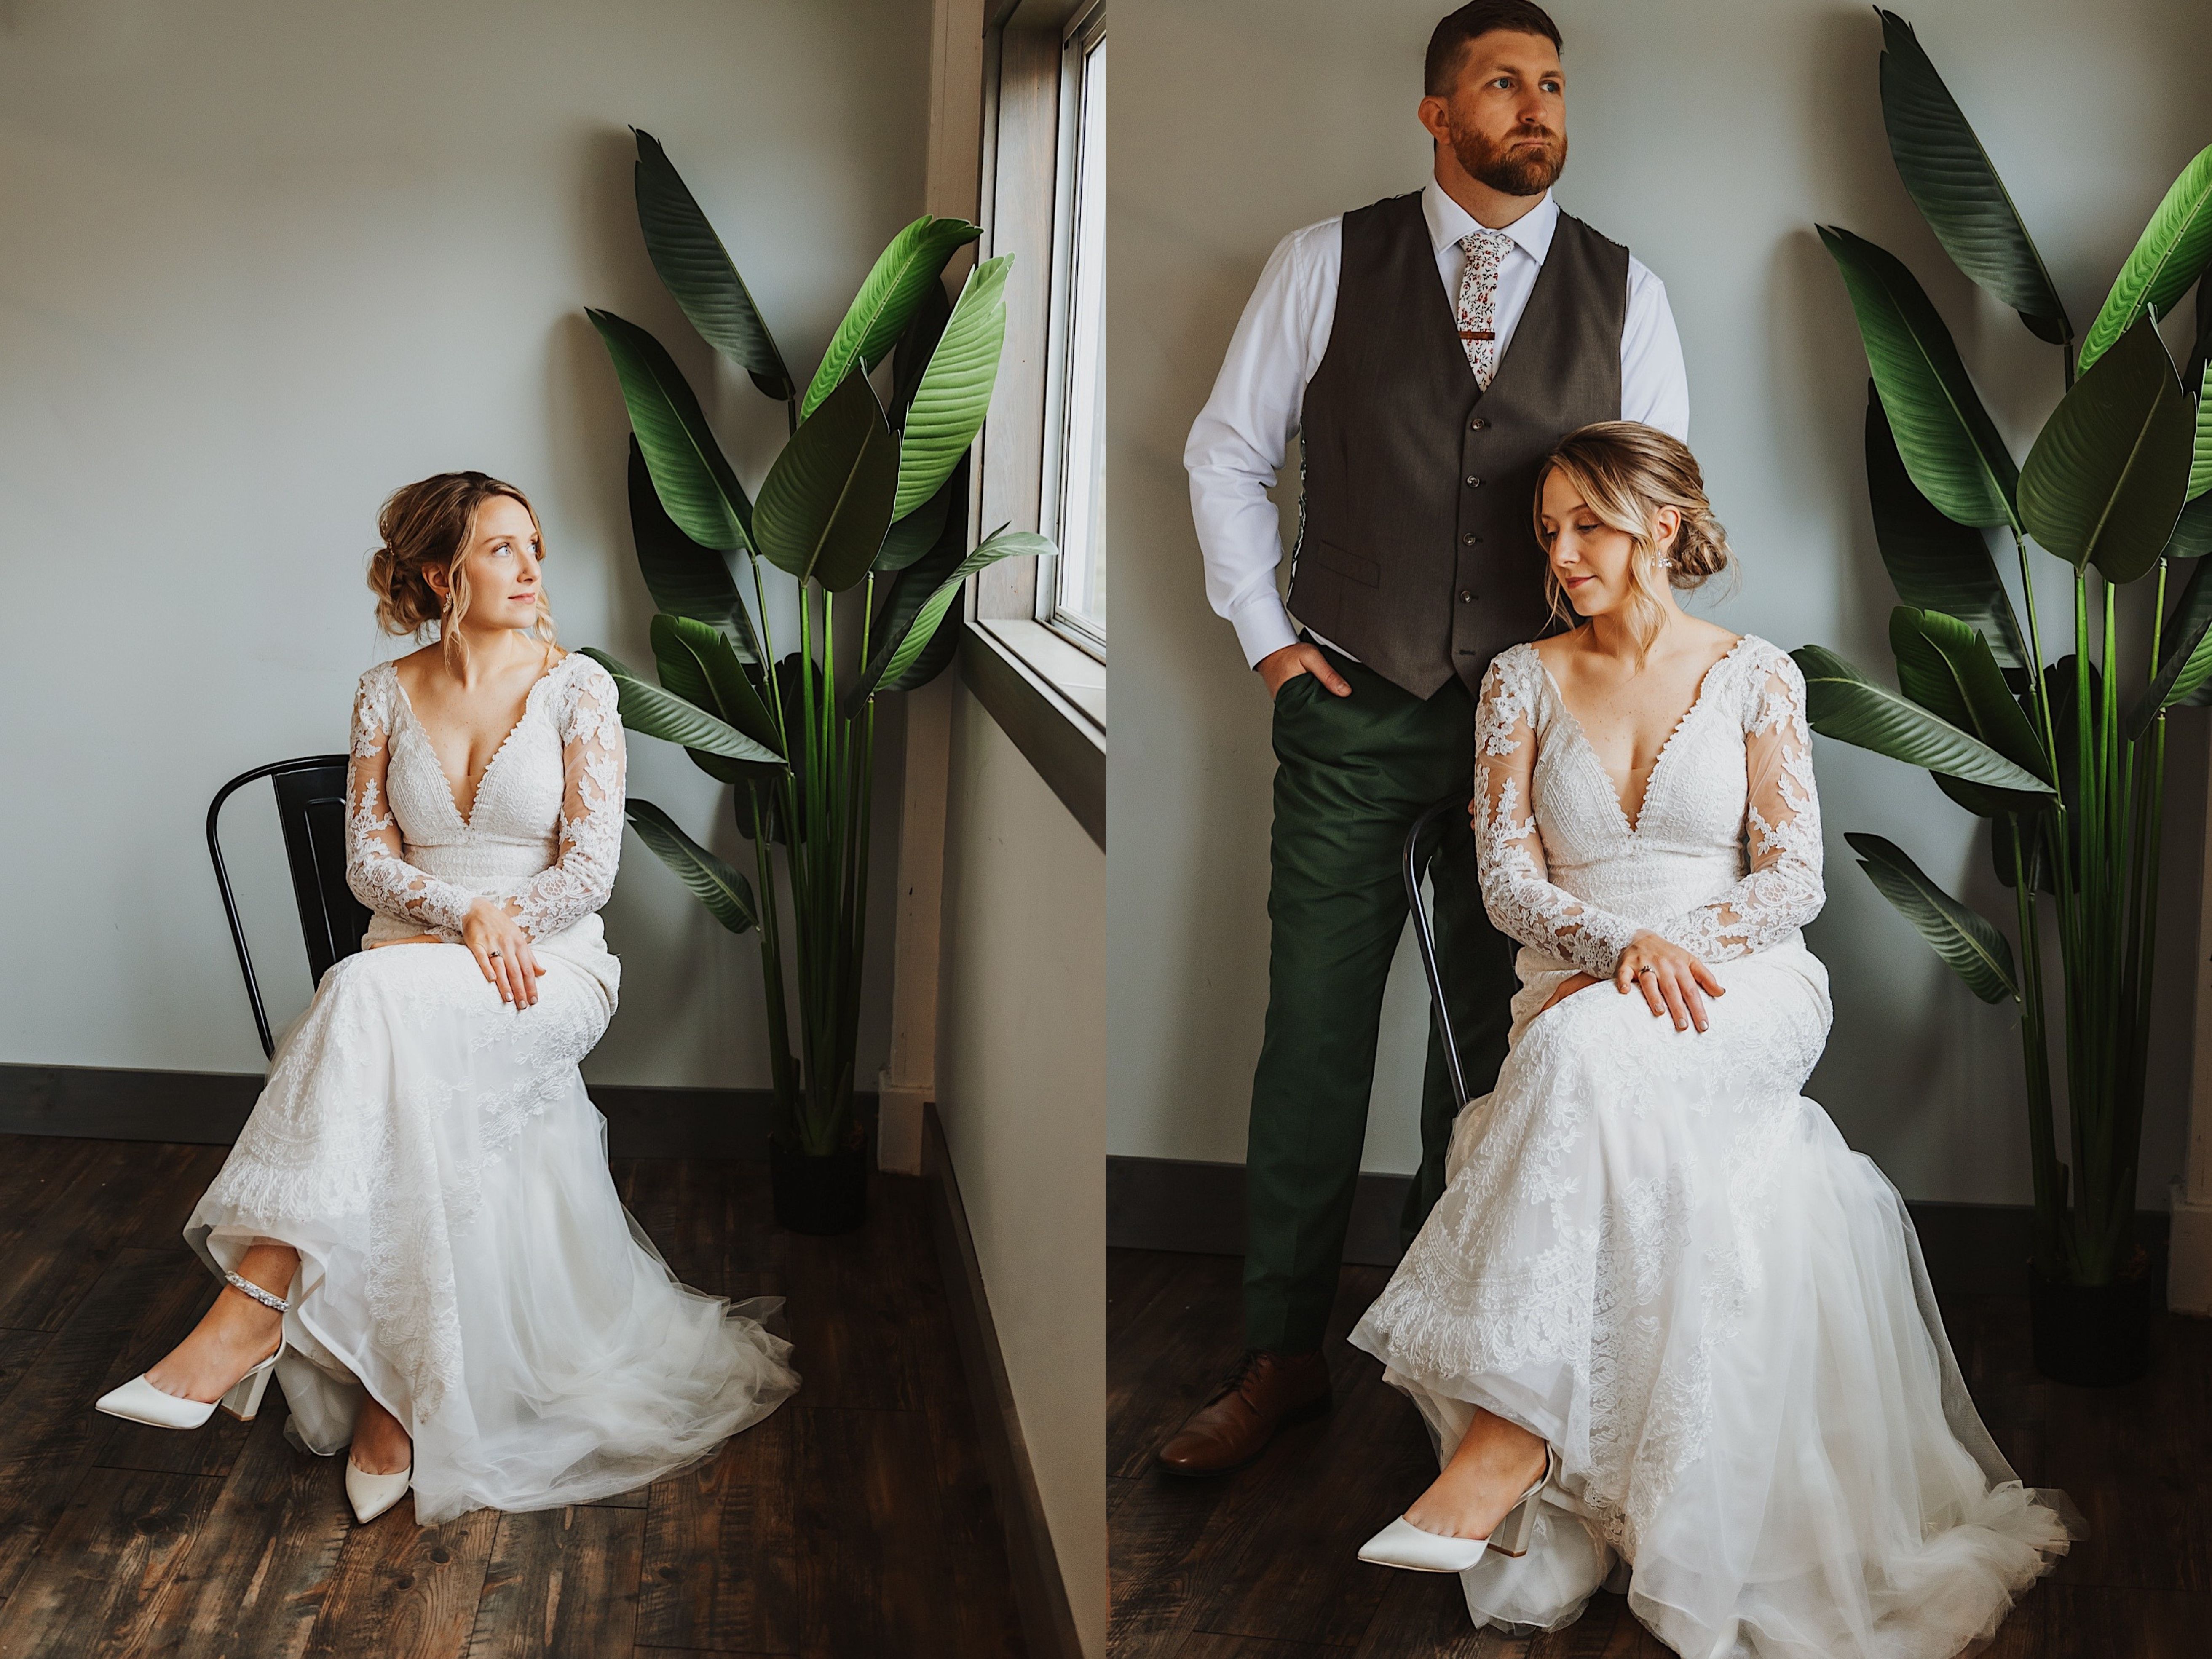 2 photos side by side, the left is a portrait photo of a bride sitting in a chair looking out a window, the right is of the bride in the same chair with the groom standing next to her